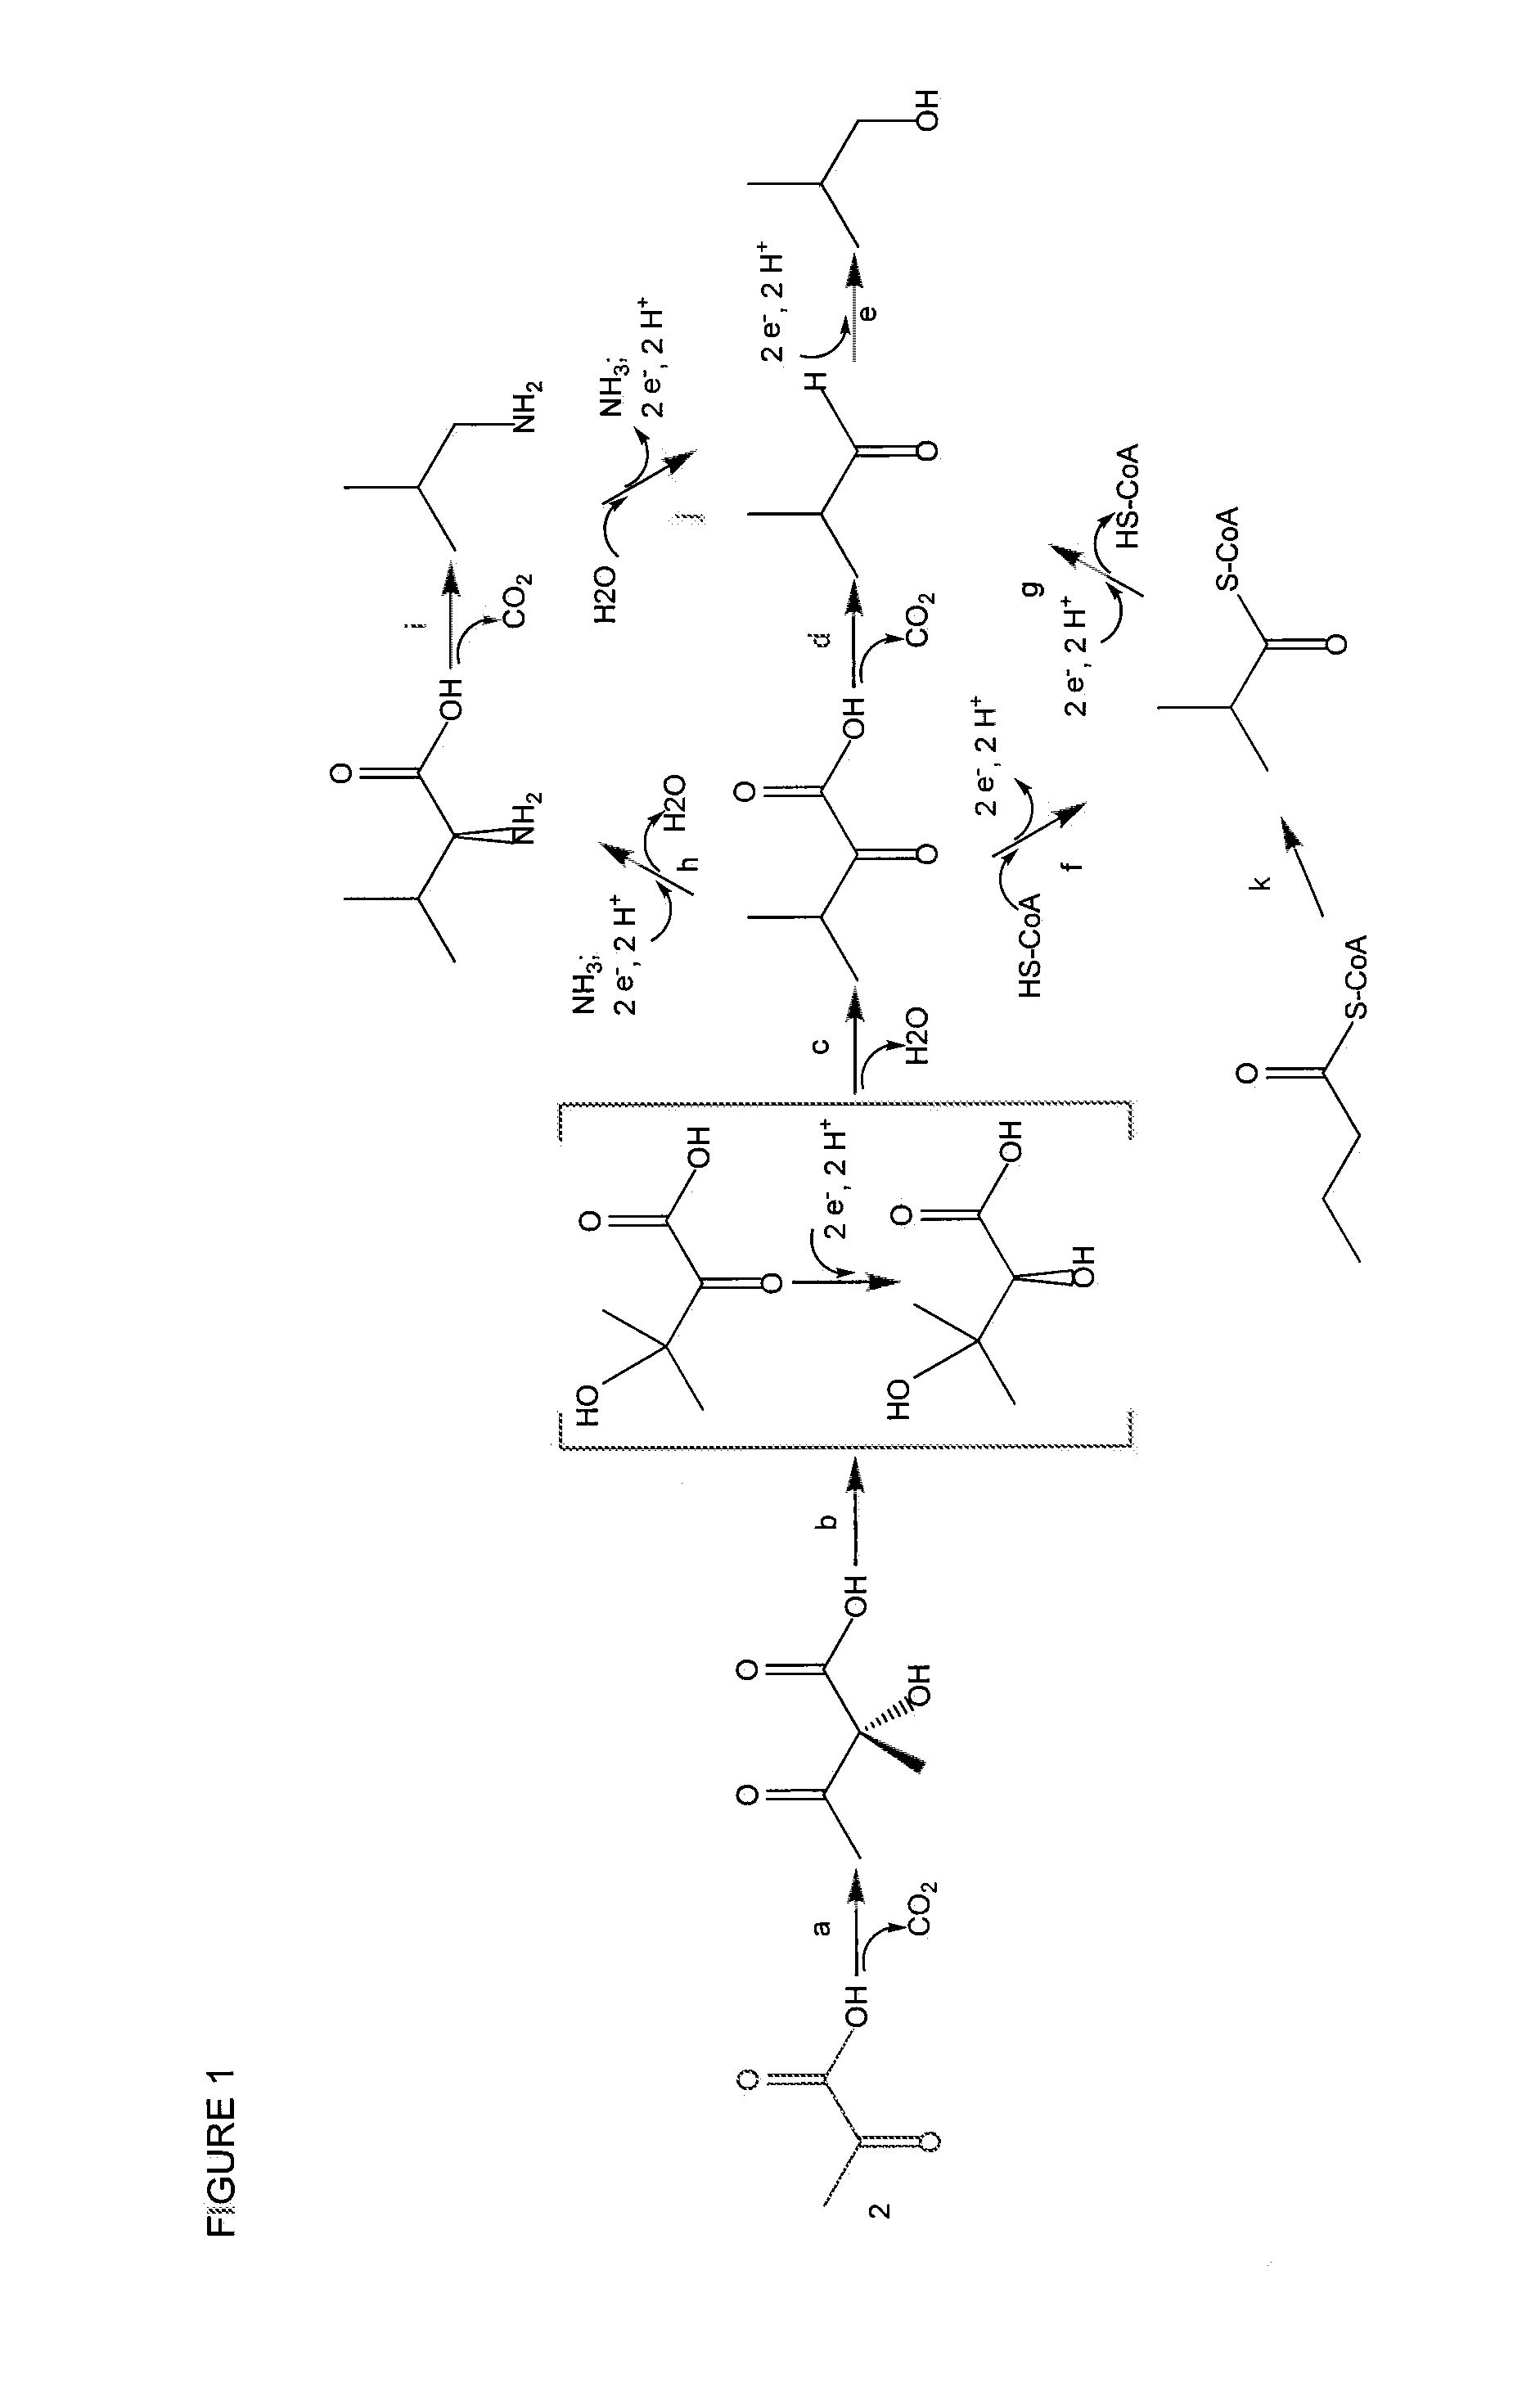 Ketol-acid reductoisomerase enzymes and methods of use